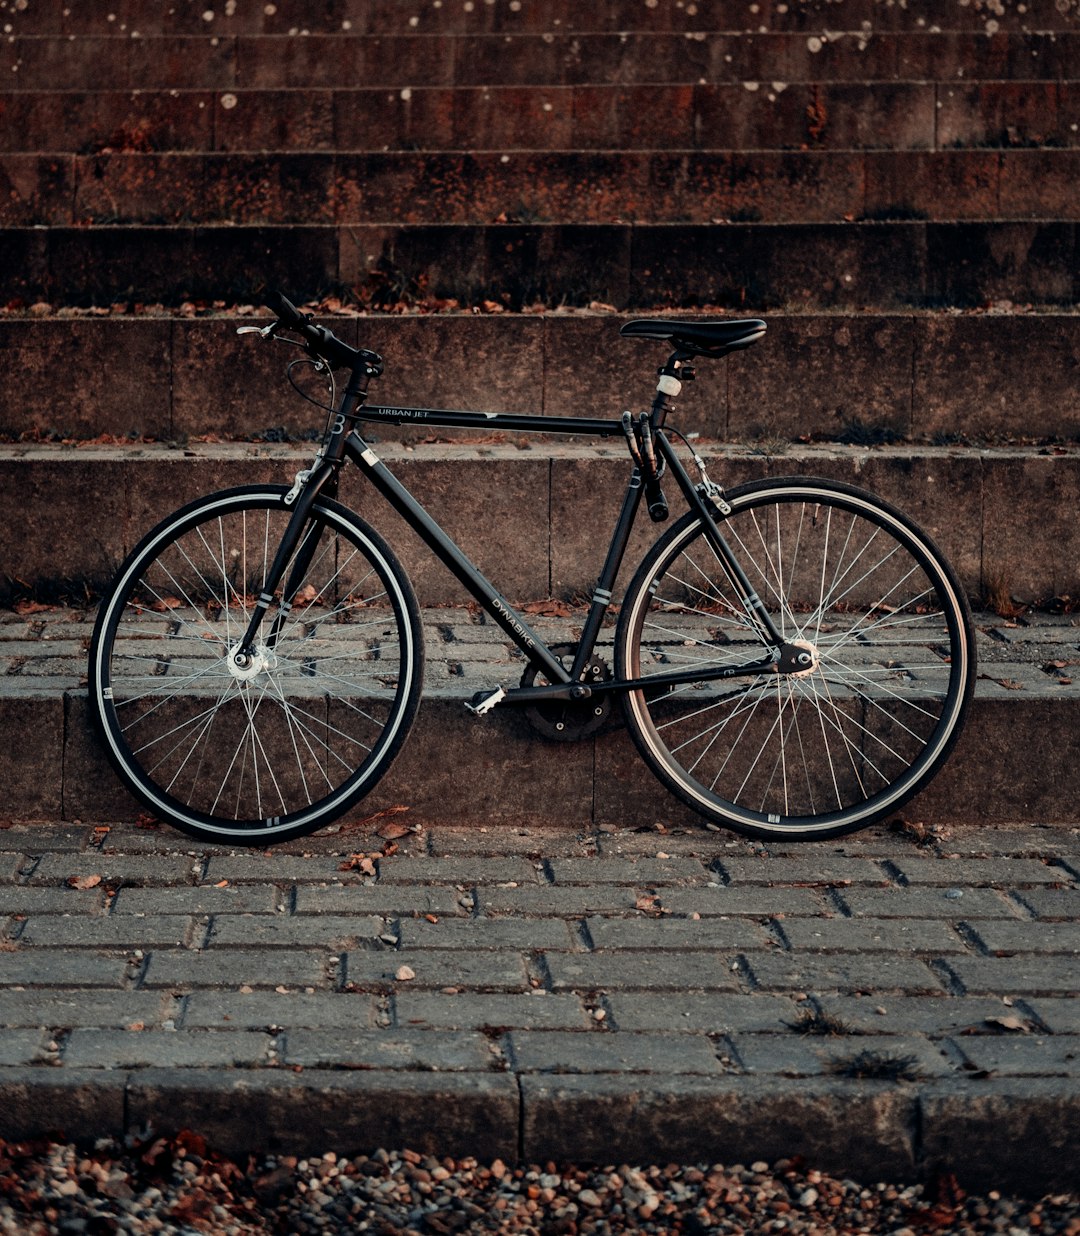 black and gray road bike leaning on brown brick wall